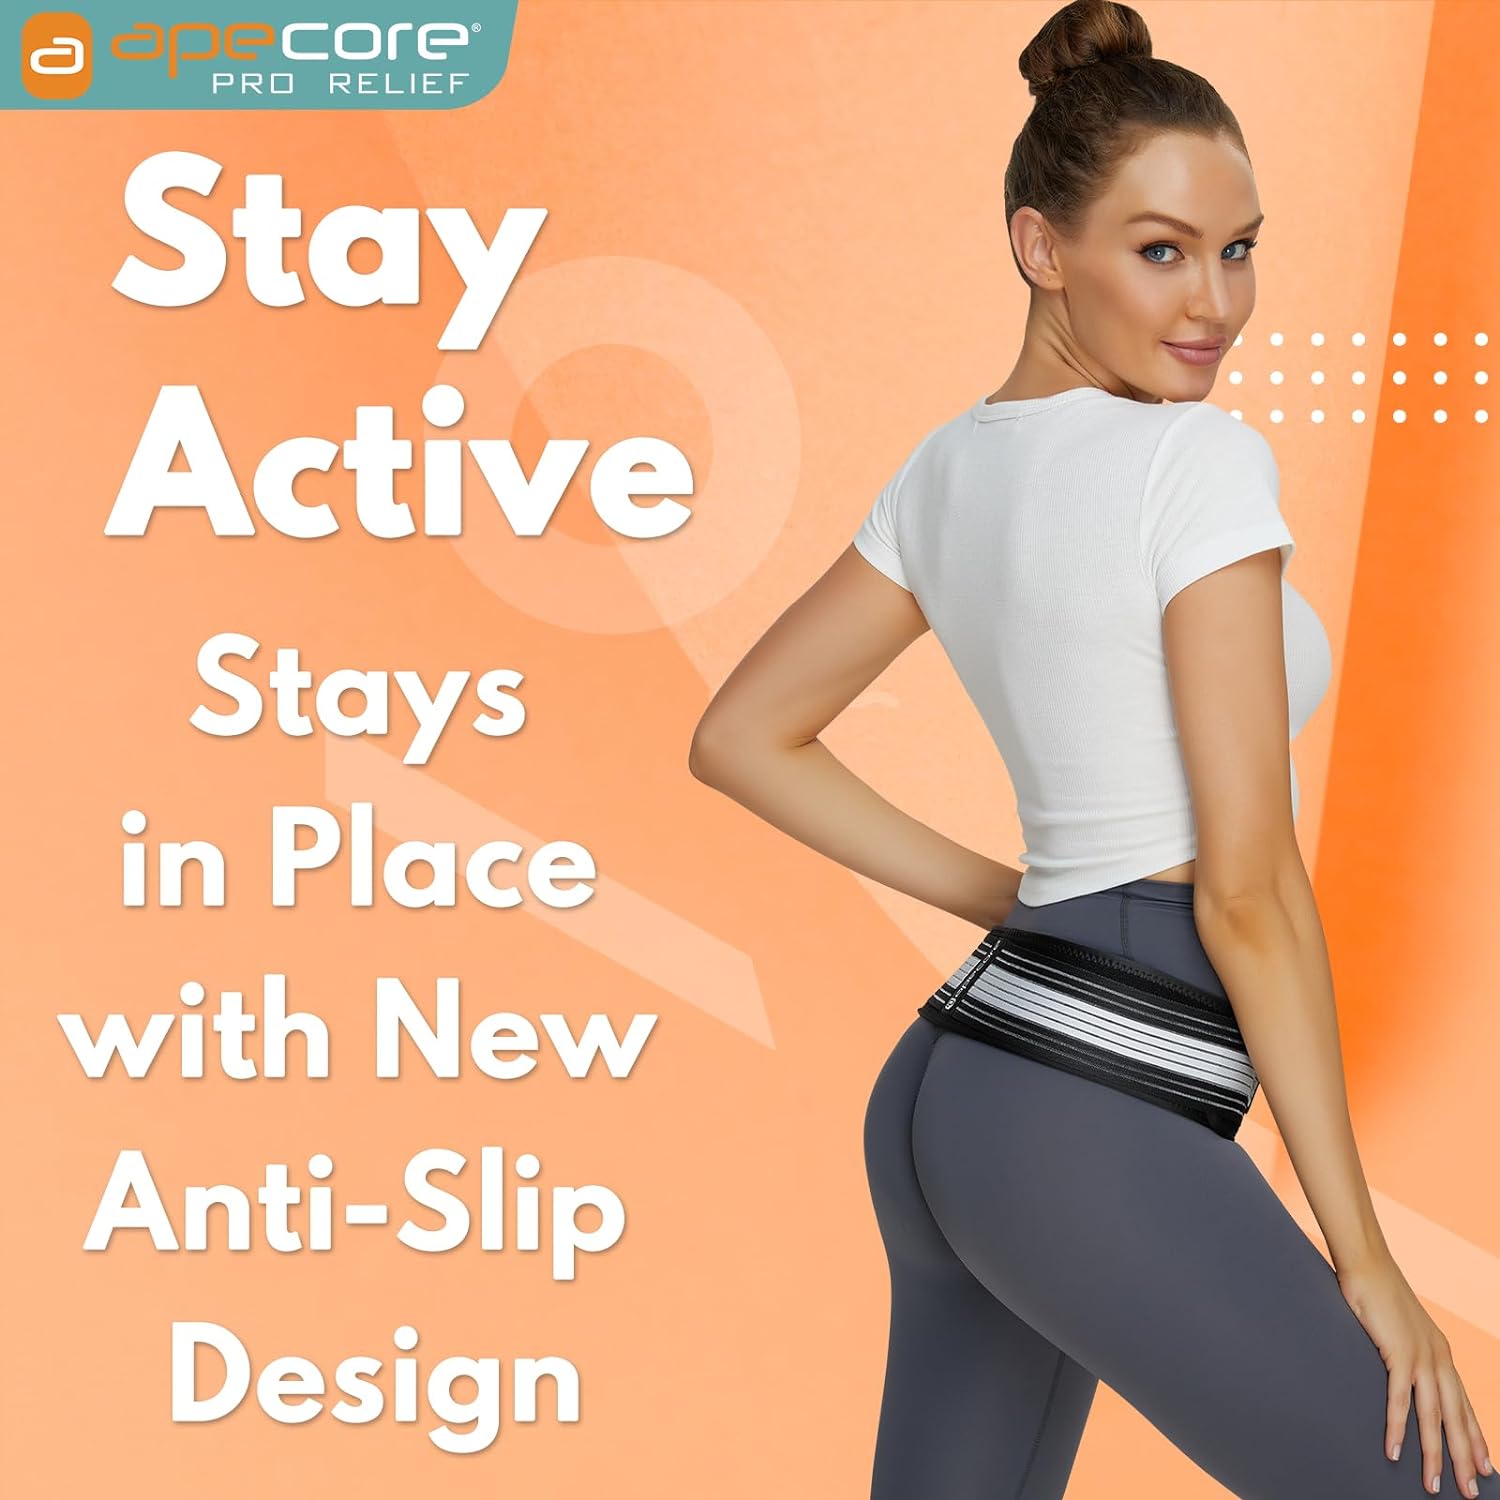 APECORE Sacroiliac Hip Belt for Women and Men That Alleviates Sciatic, Pelvic, Lower Back, Leg and Sacral Nerve Pain Caused by Si Joint Dysfunction| Hip Brace (Regular)